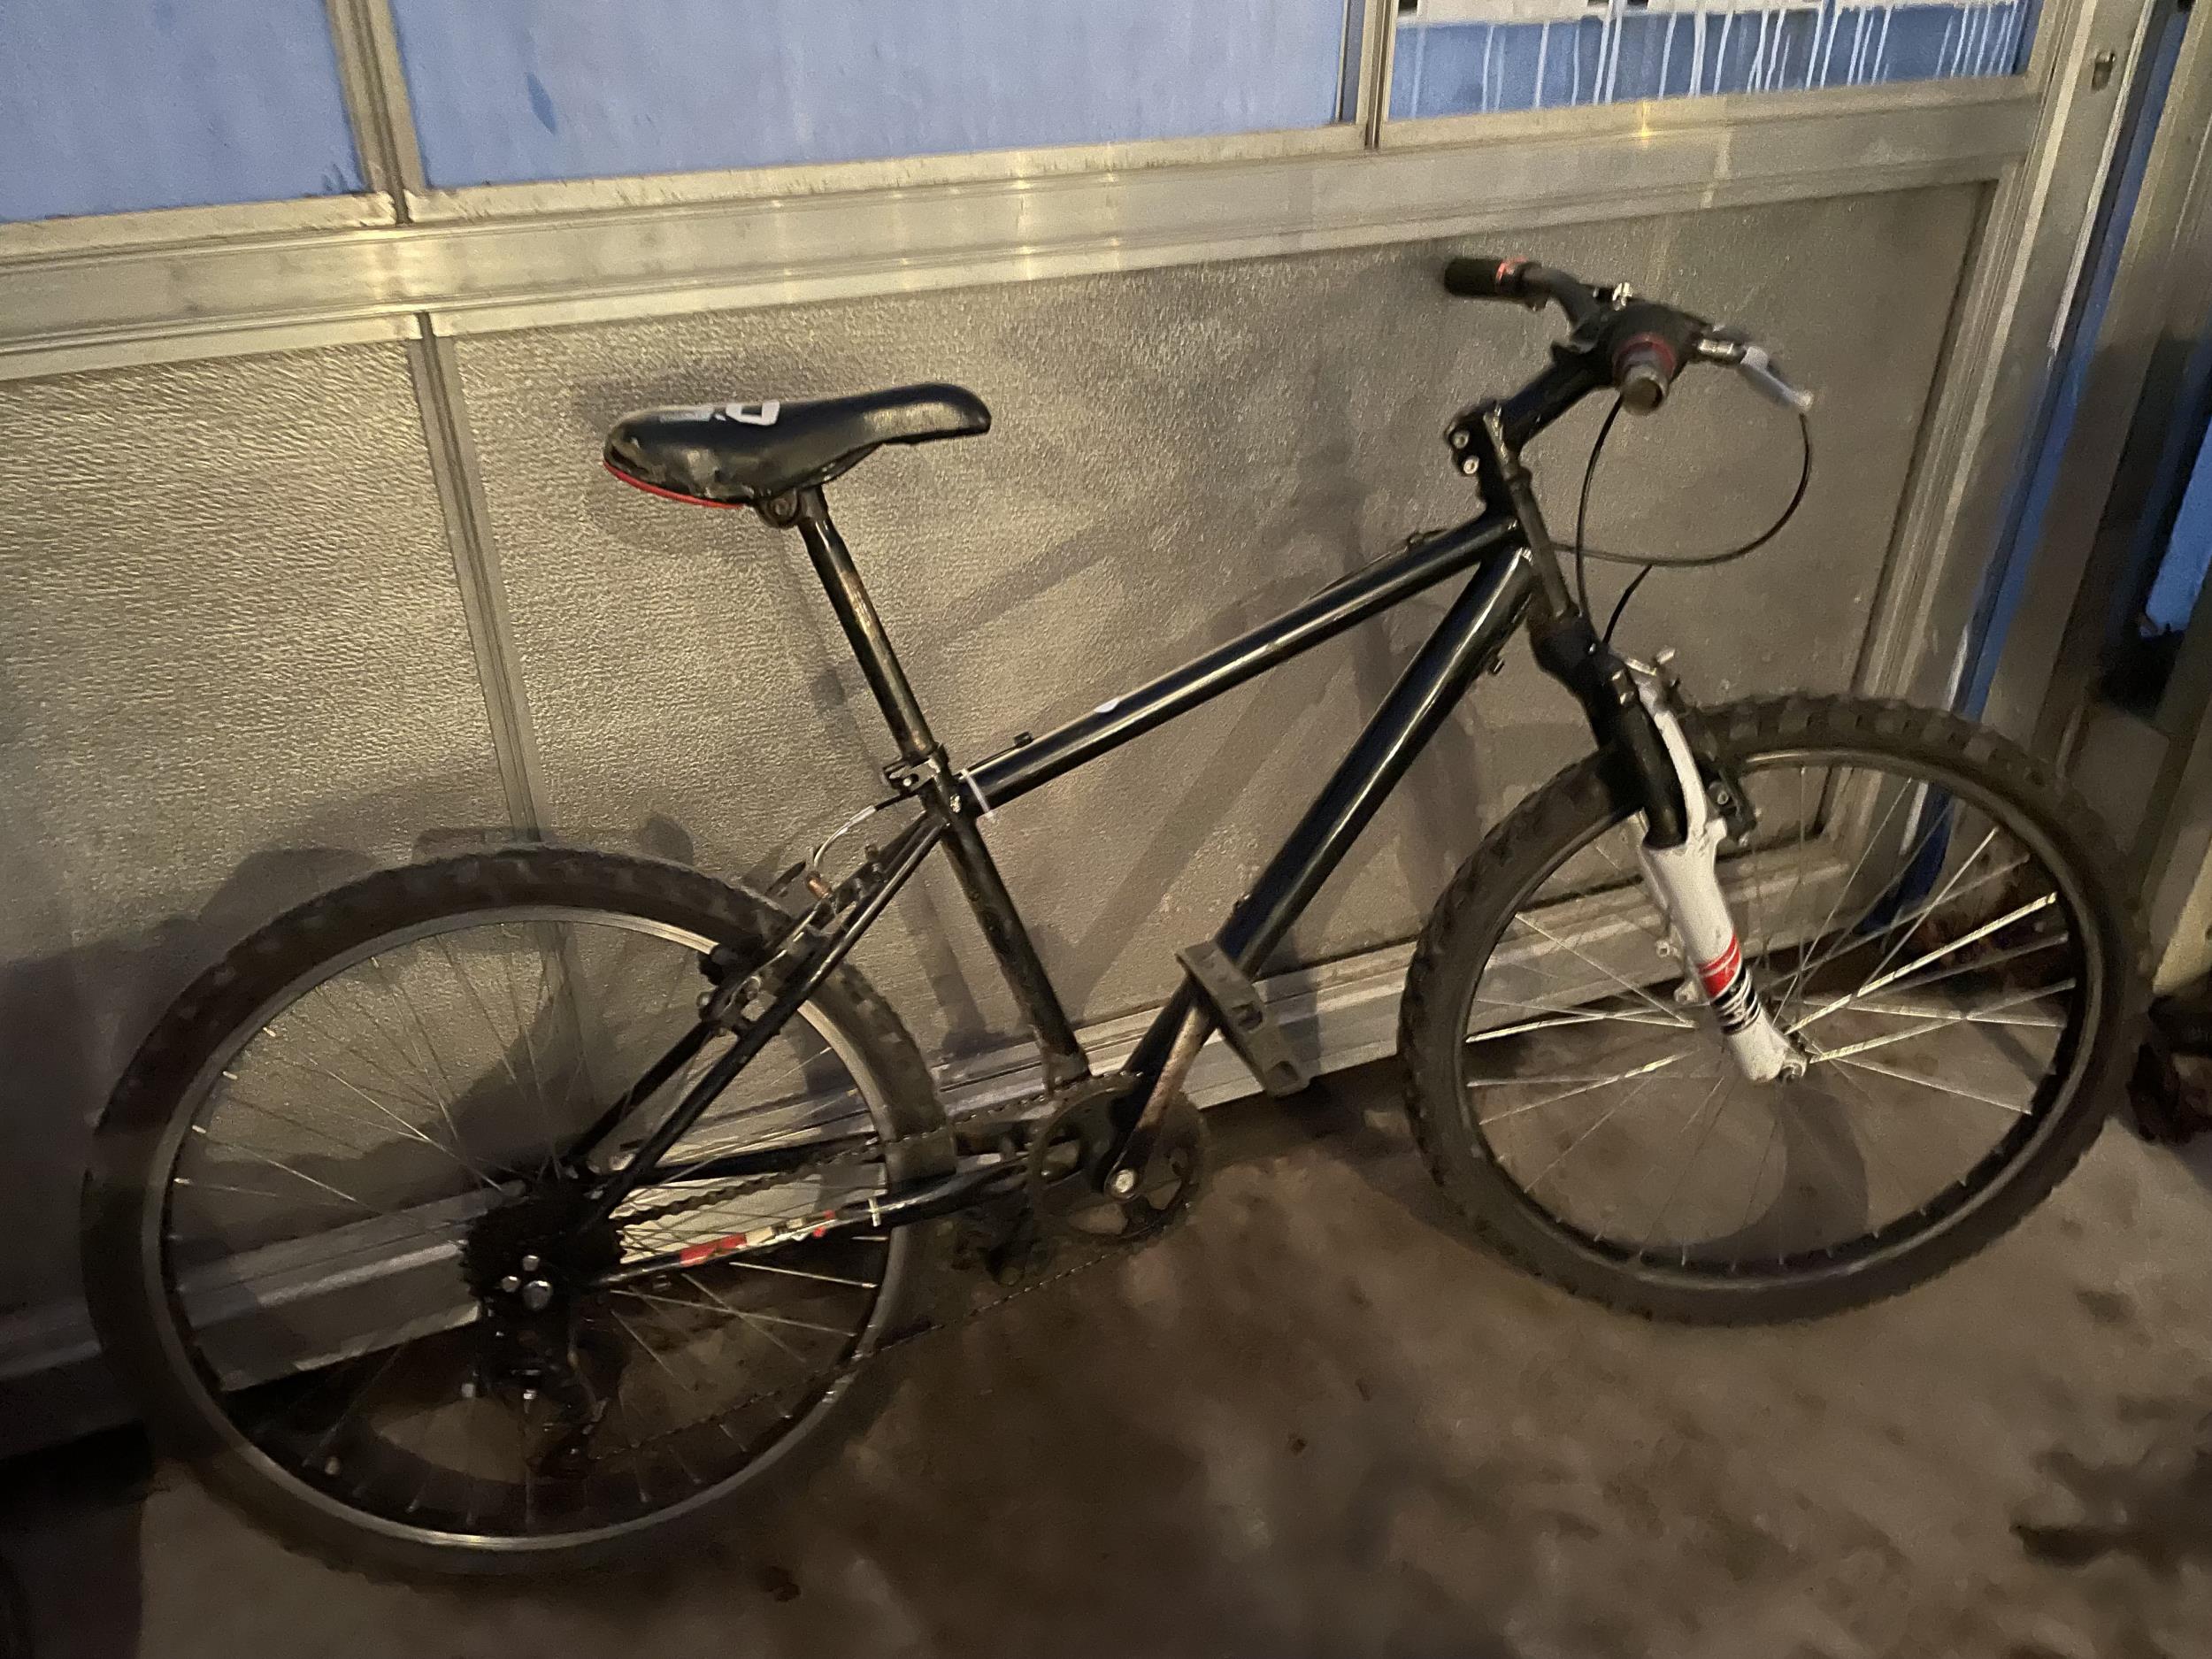 A BLAKCK MOUNTAIN BIKE WITH FRONT SUSPENSION AND 6 SPEED SHIMANO GEAR SYSTEM